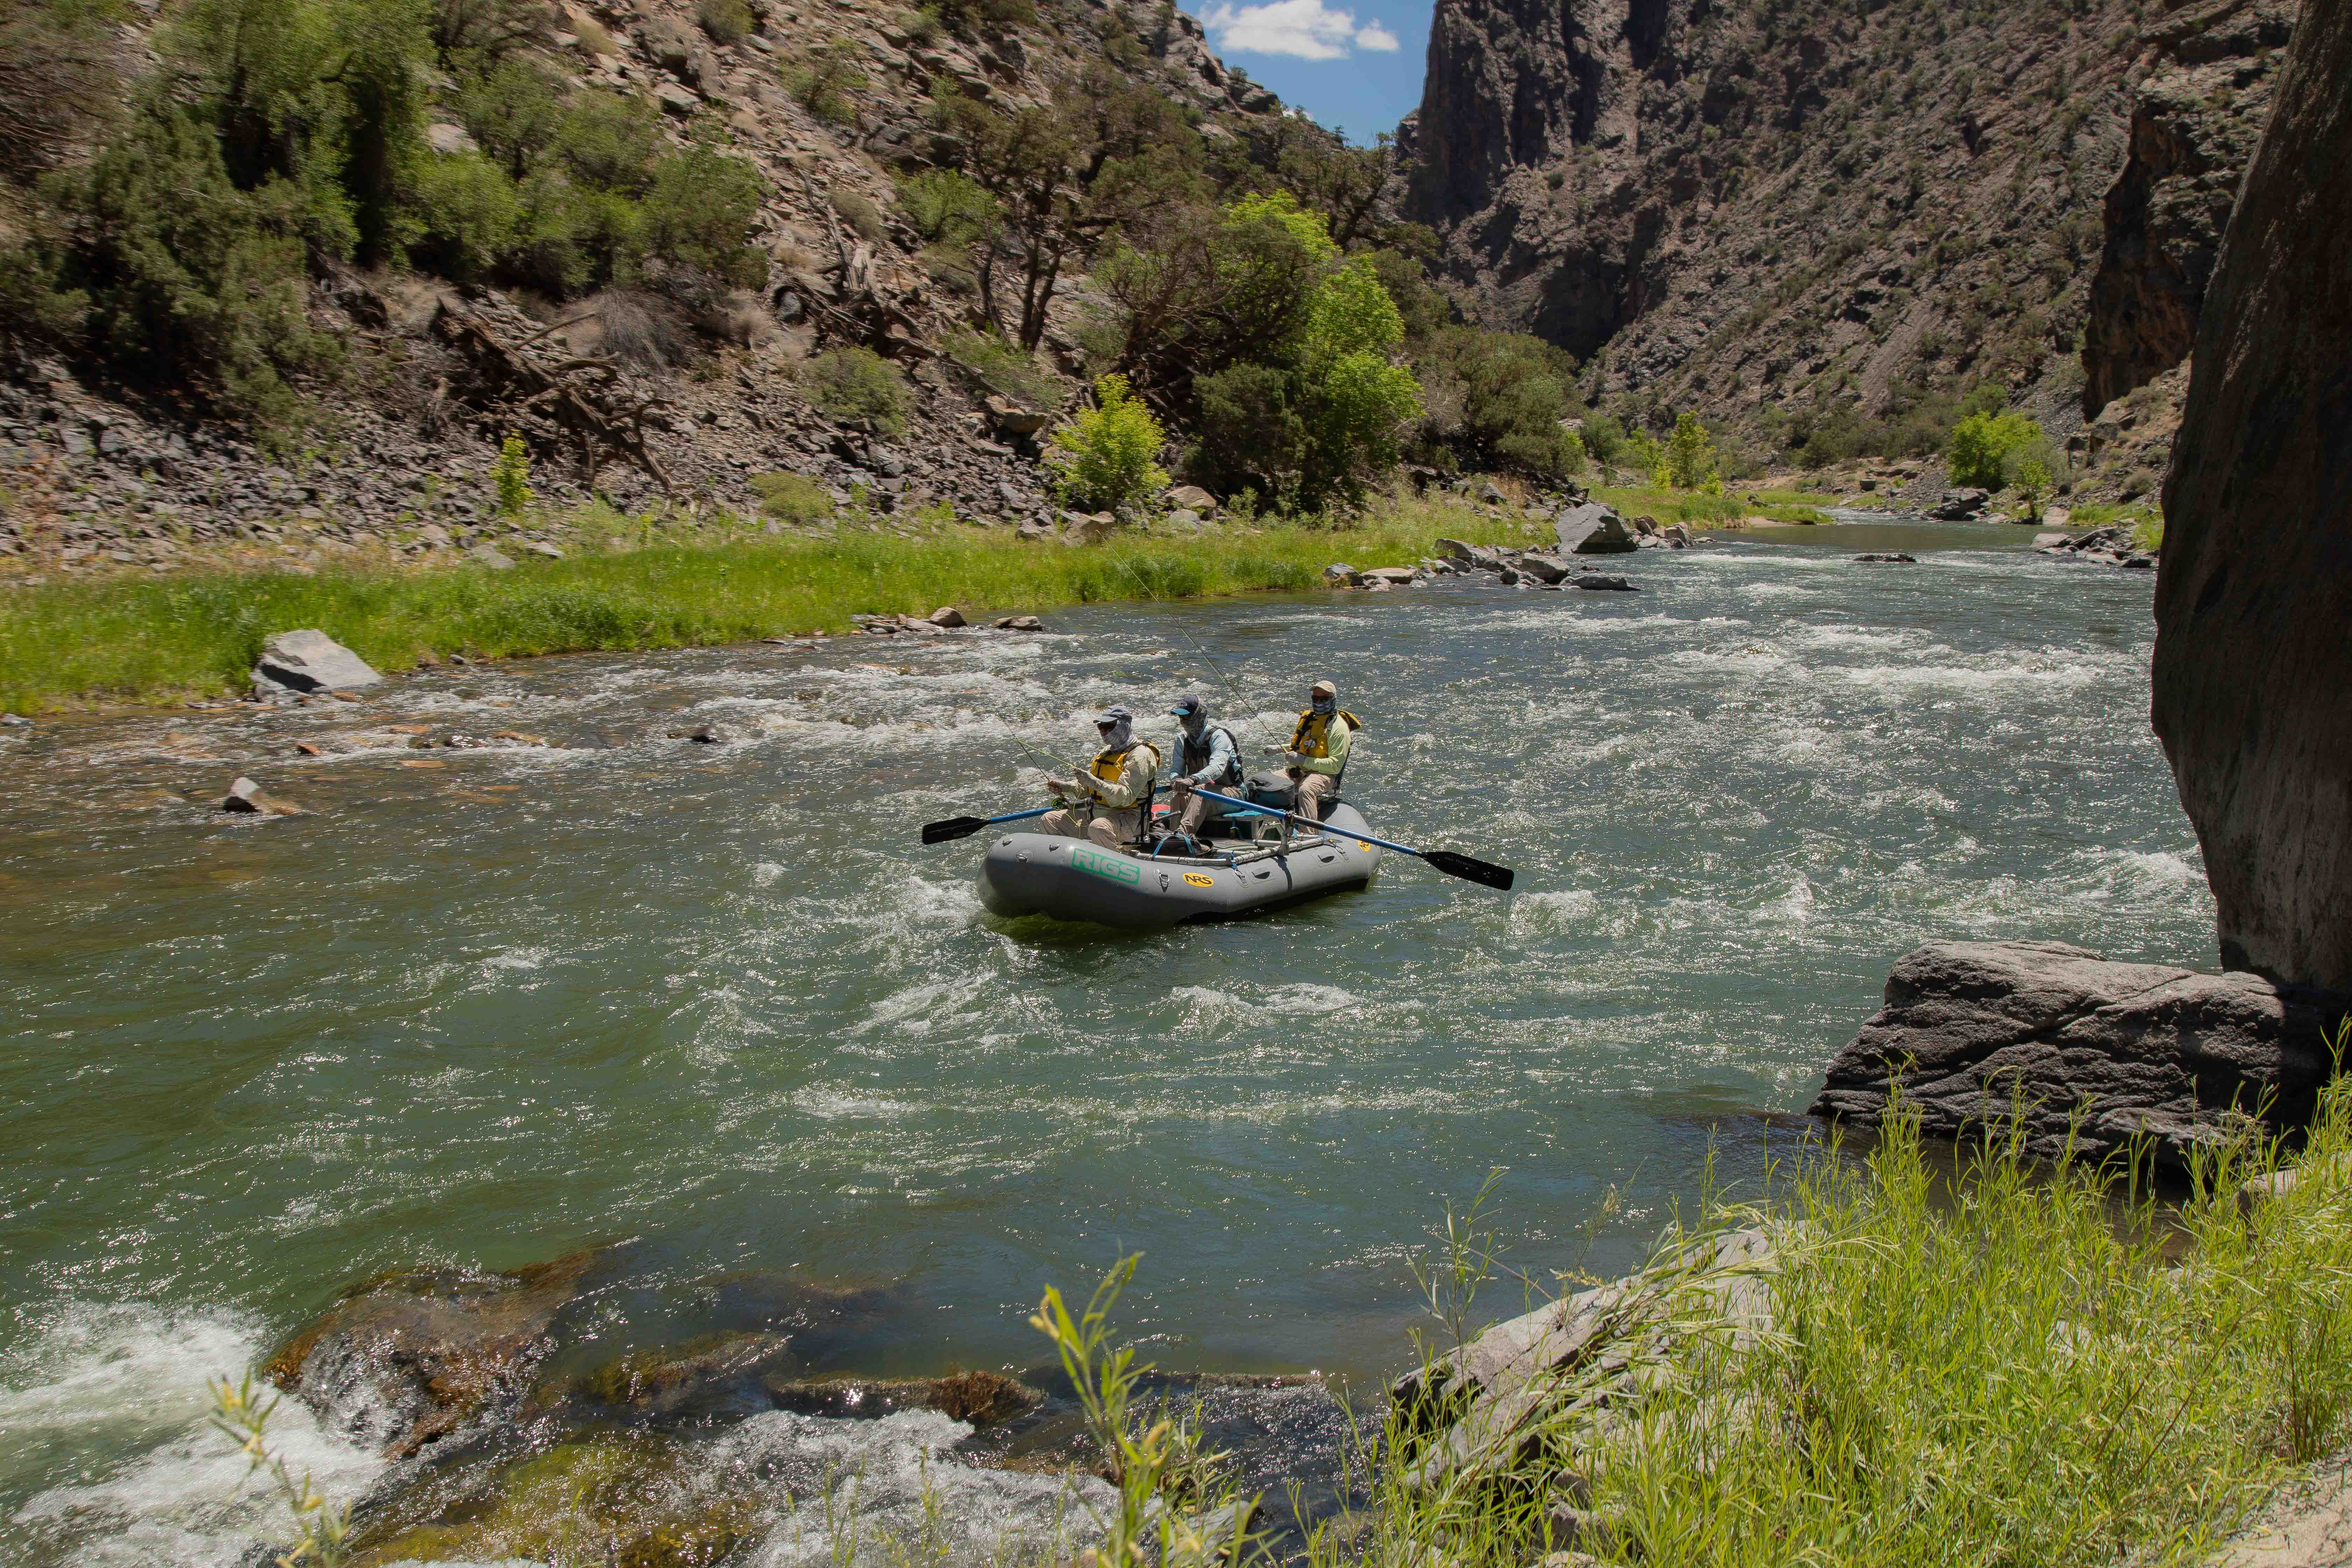 Where to fish in the Gunnison Valley